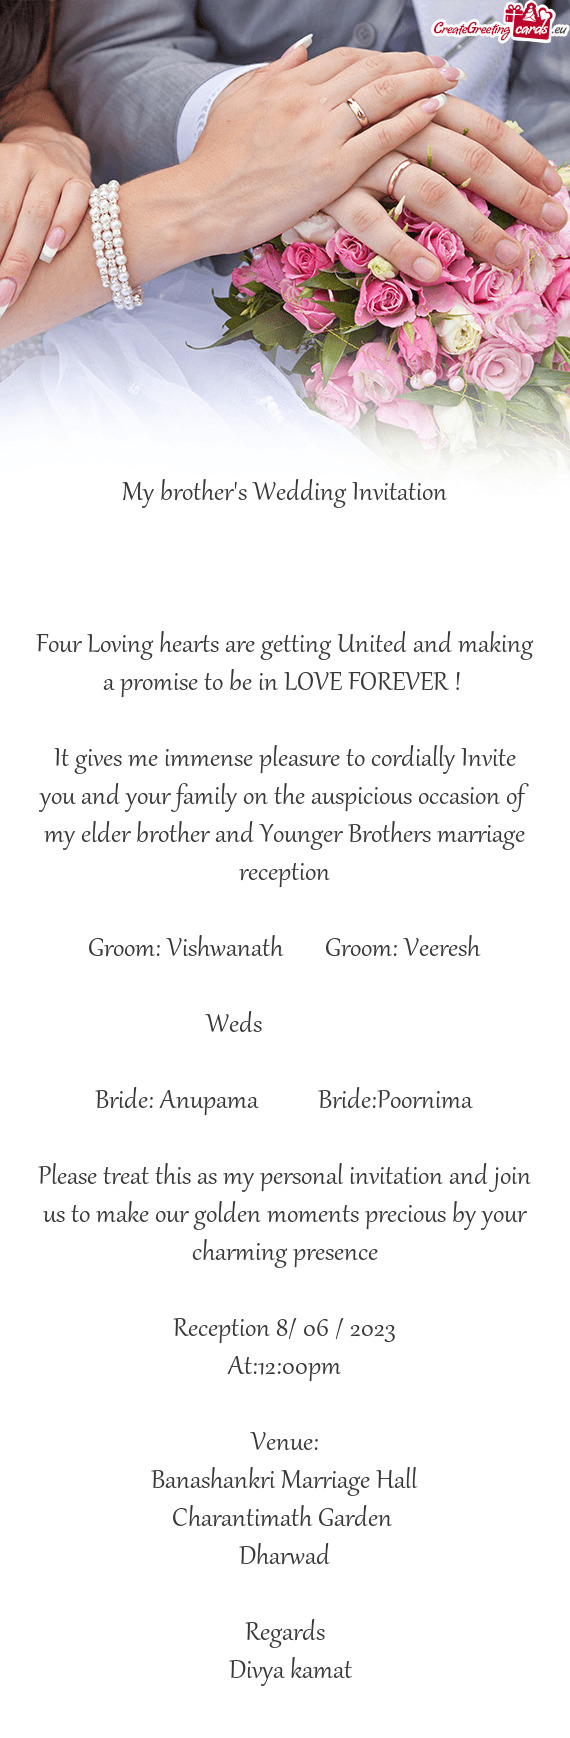 Four Loving hearts are getting United and making a promise to be in LOVE FOREVER